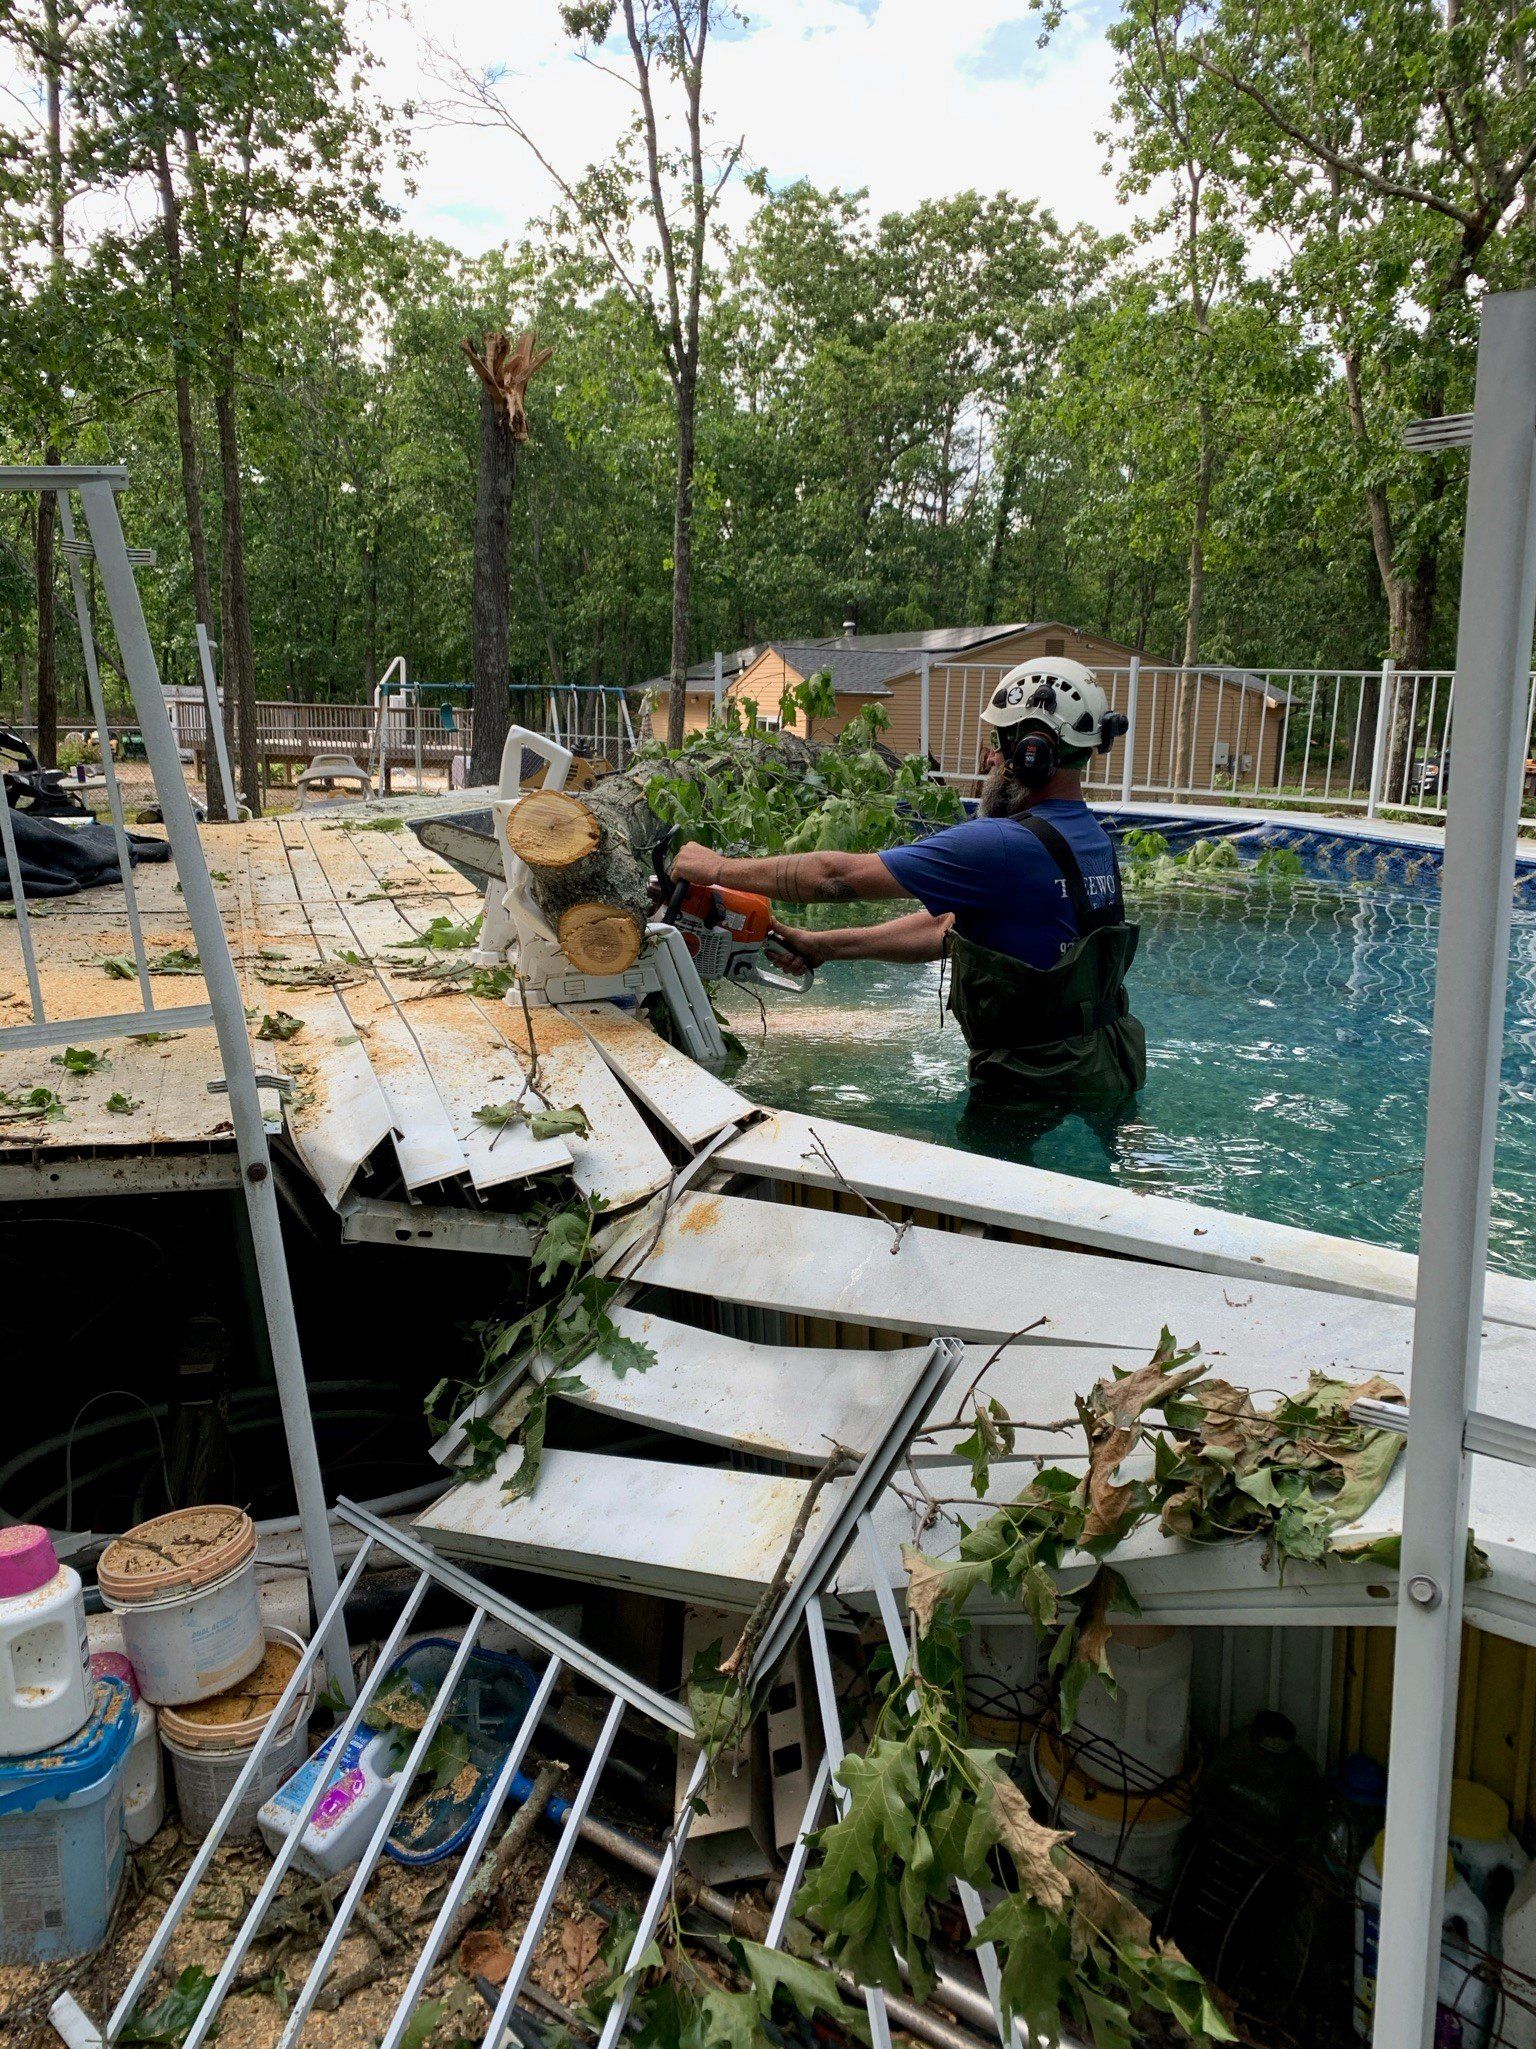 Man Cutting Tree On Pool — Atlantic and Cape May Counties in Southern New Jersey — Tree Works